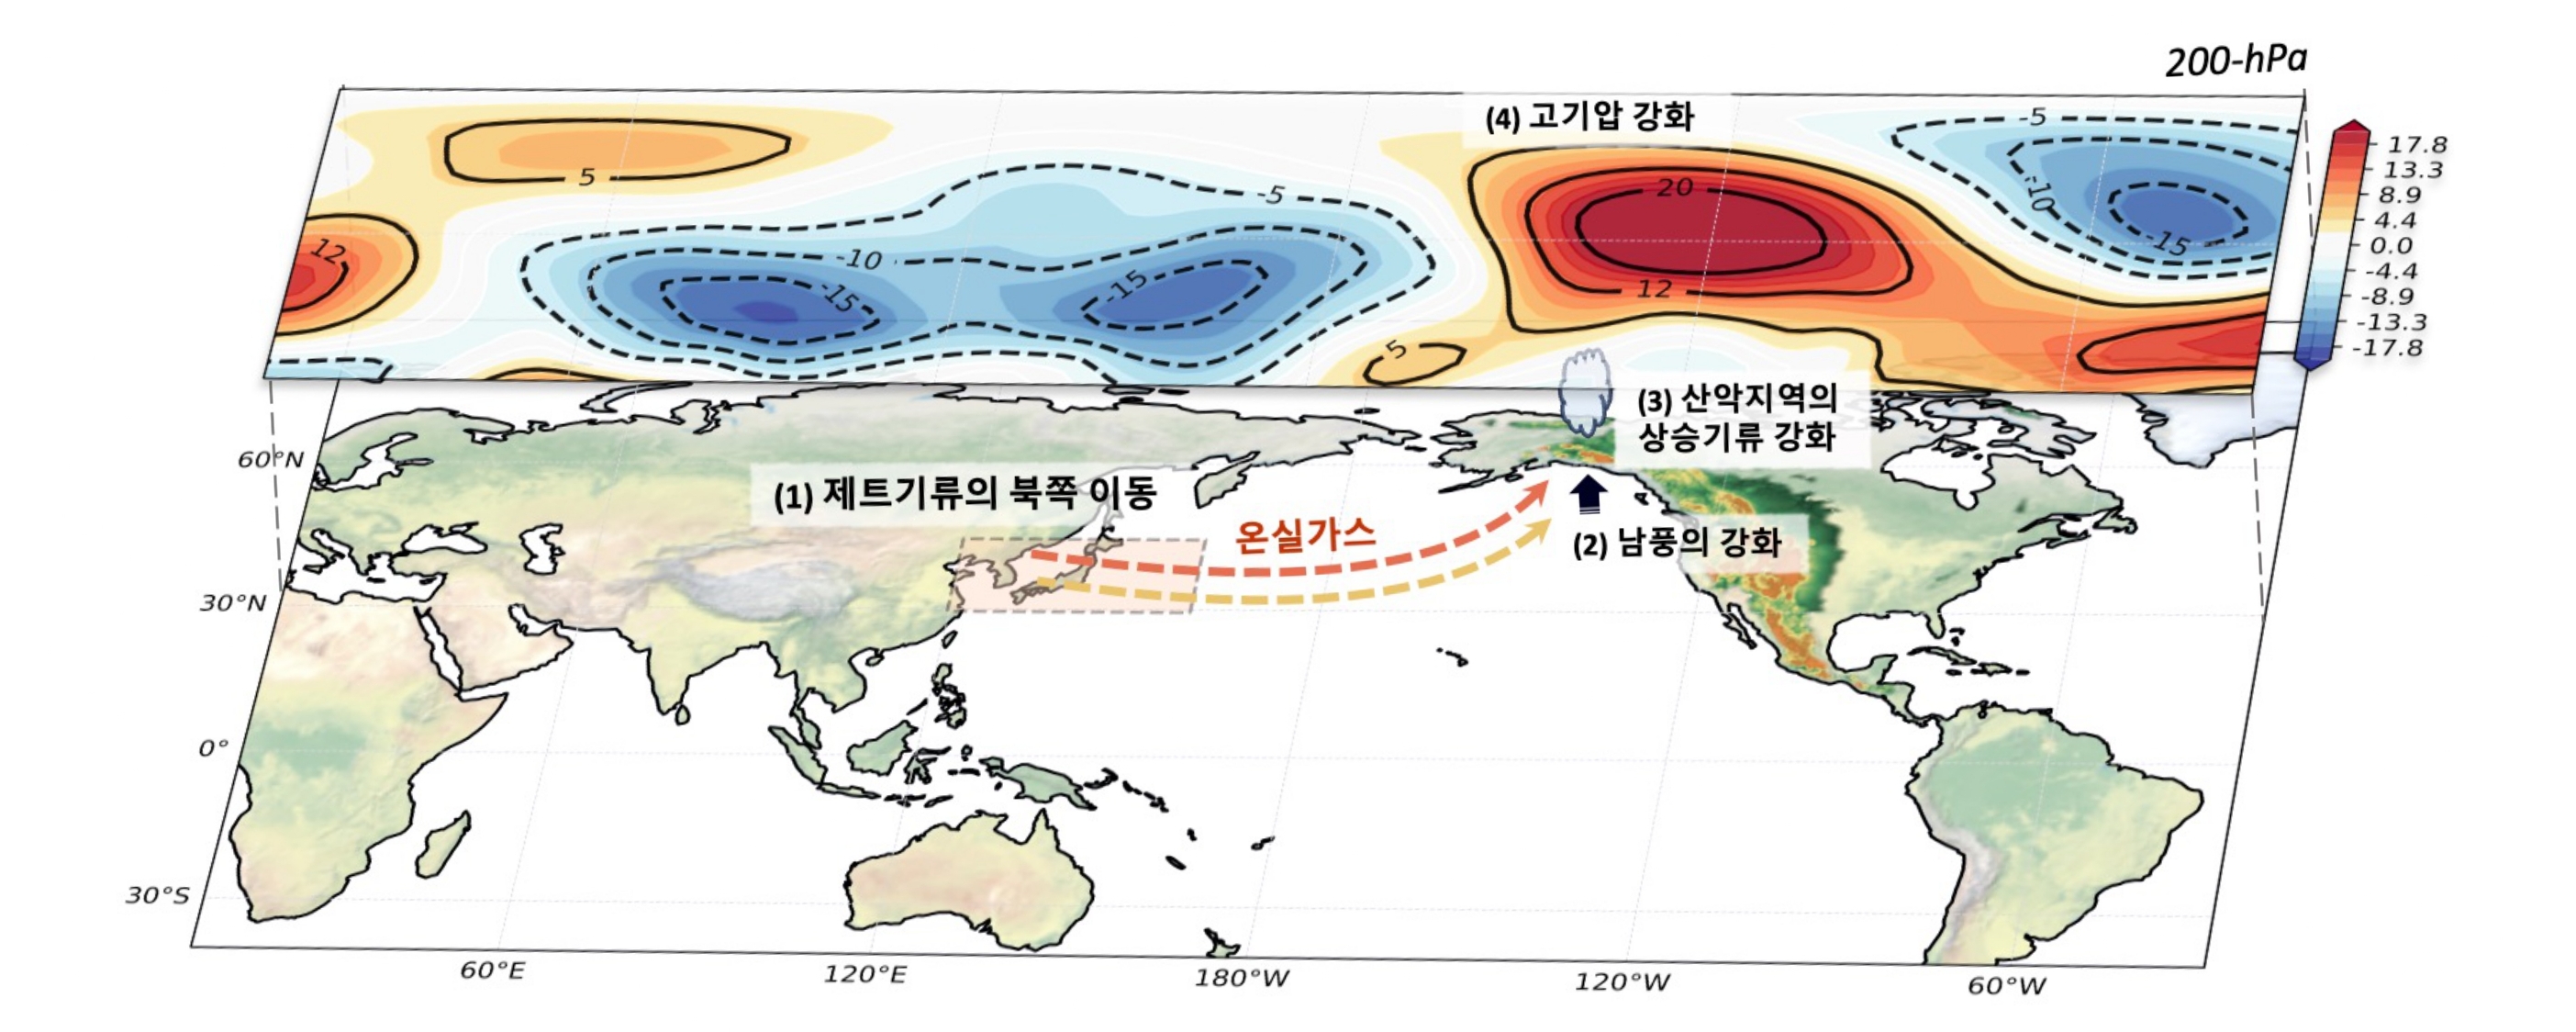 Professor Jin-Ho Yoon's joint research between Korea and the United States identified causes of abnormal climate phenomena in the Northern Hemisphere during winter 이미지